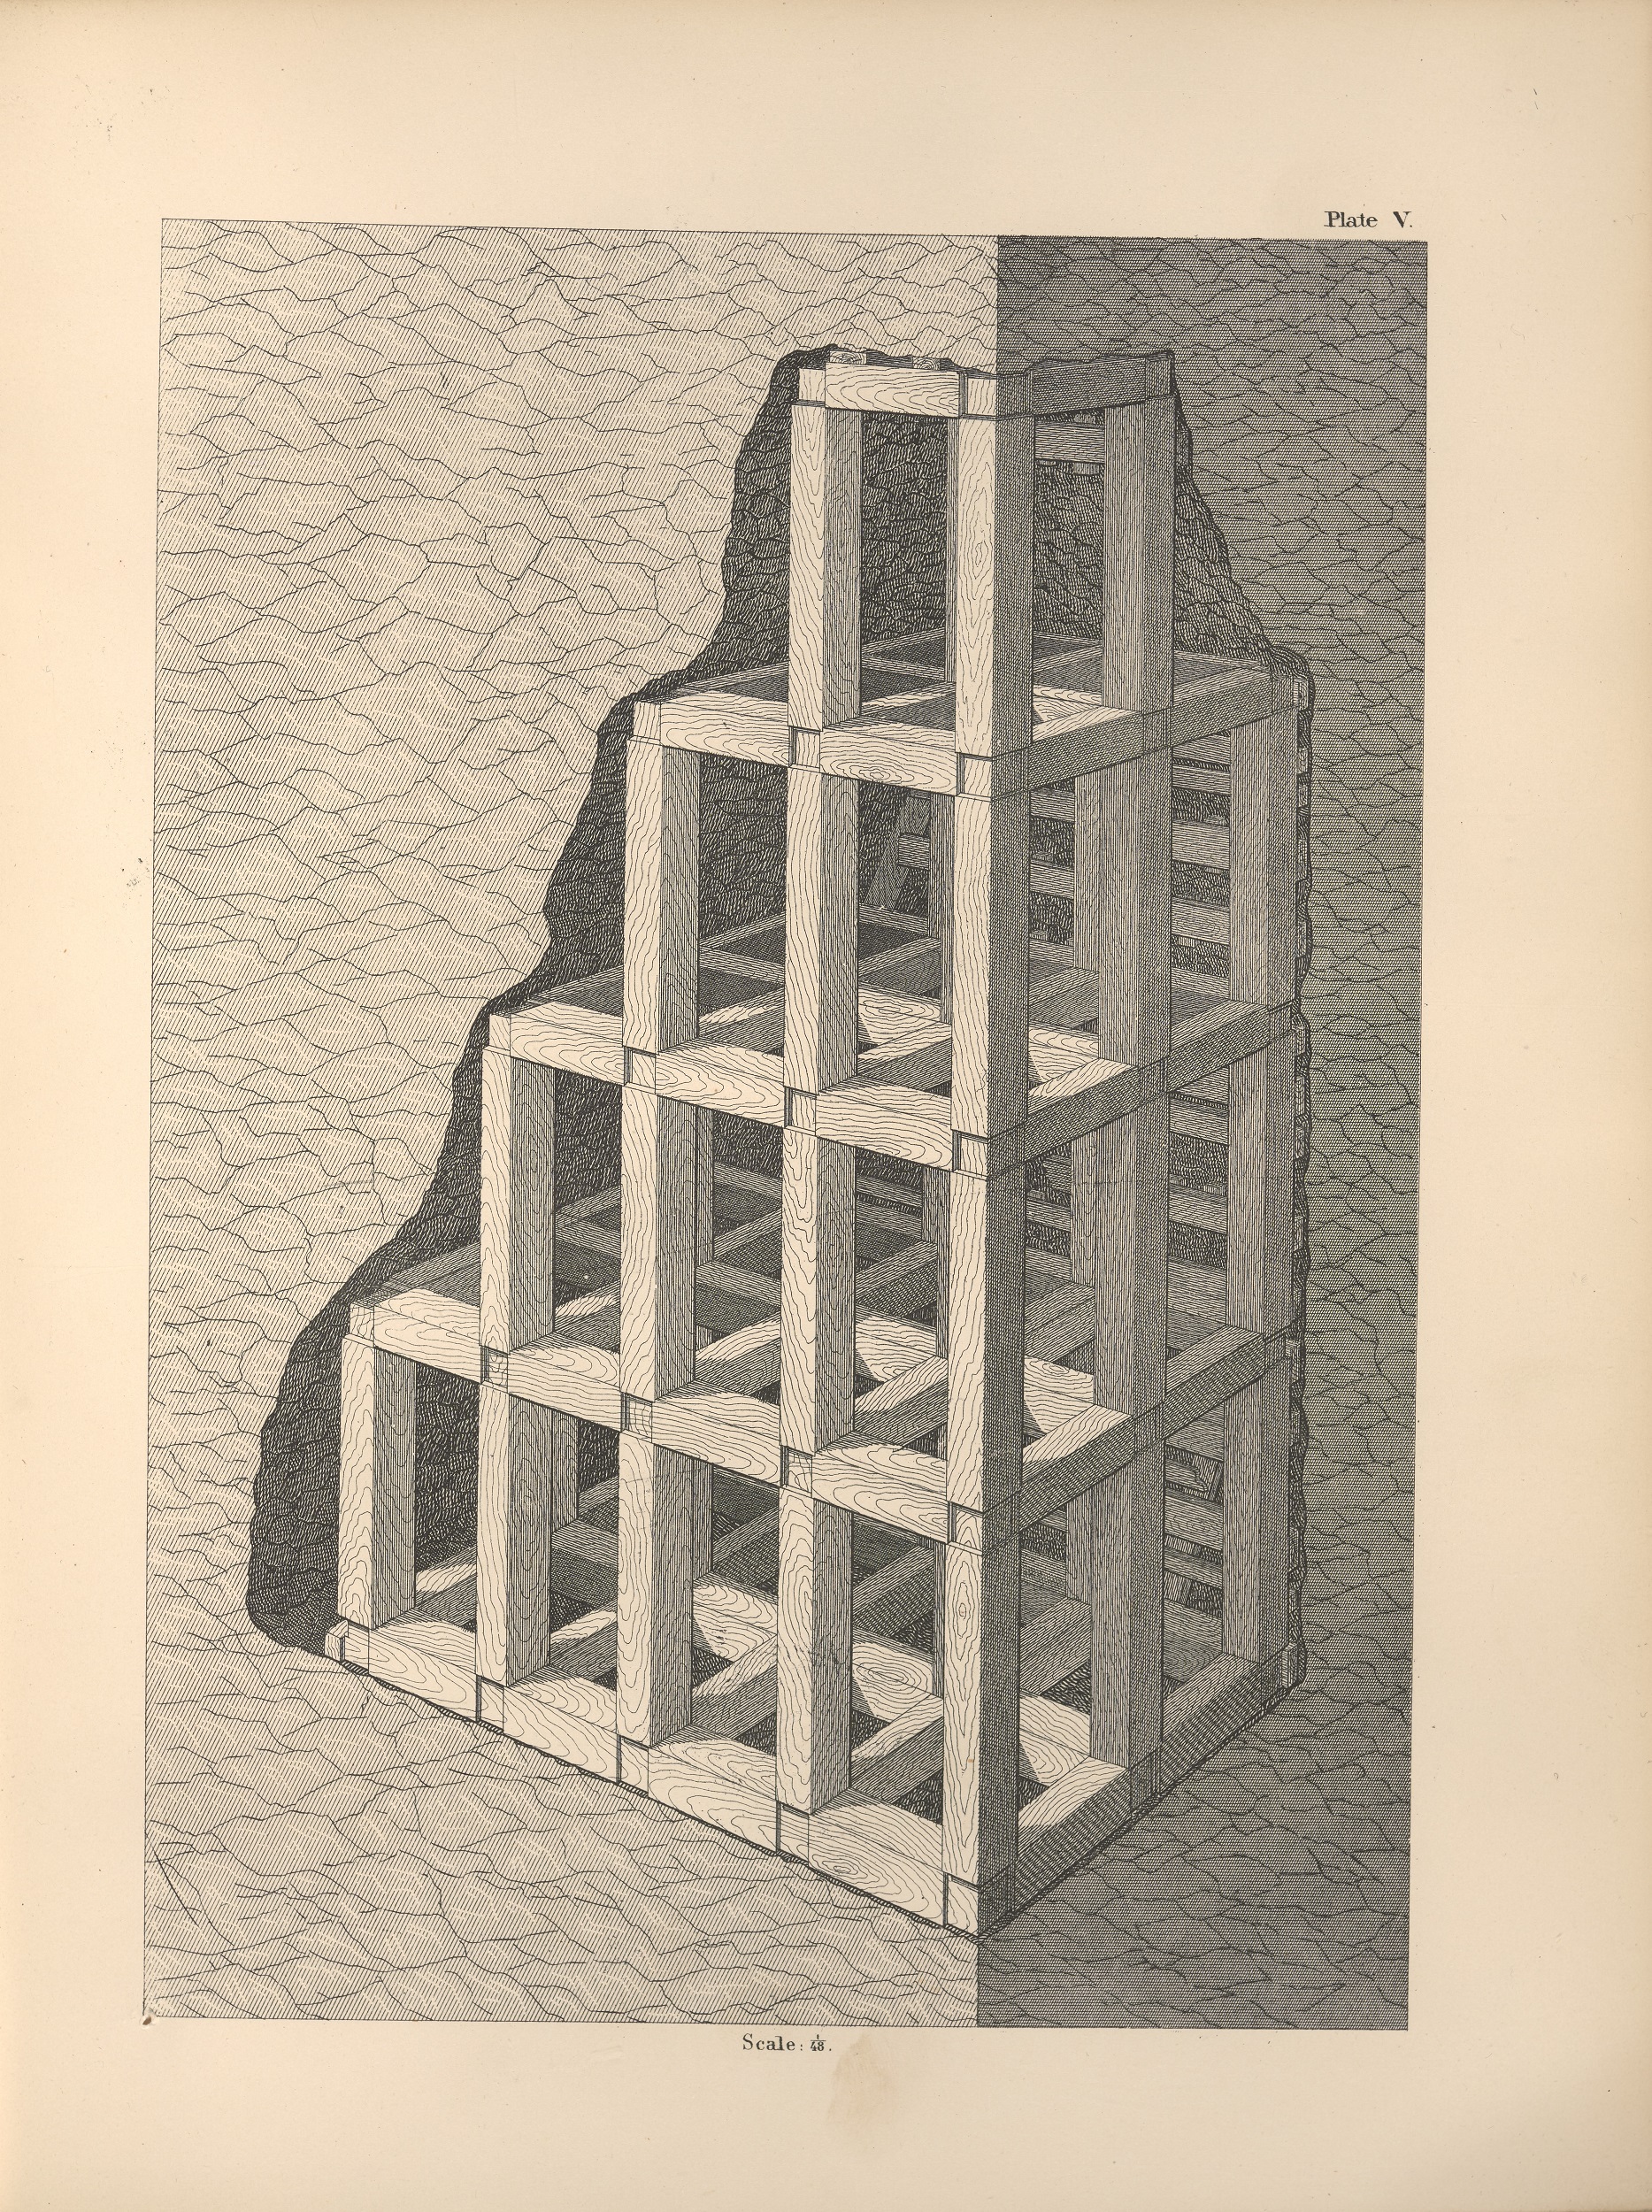 Black-and-white engraved illustration of honeycomb-like structure of timbers inside a mine